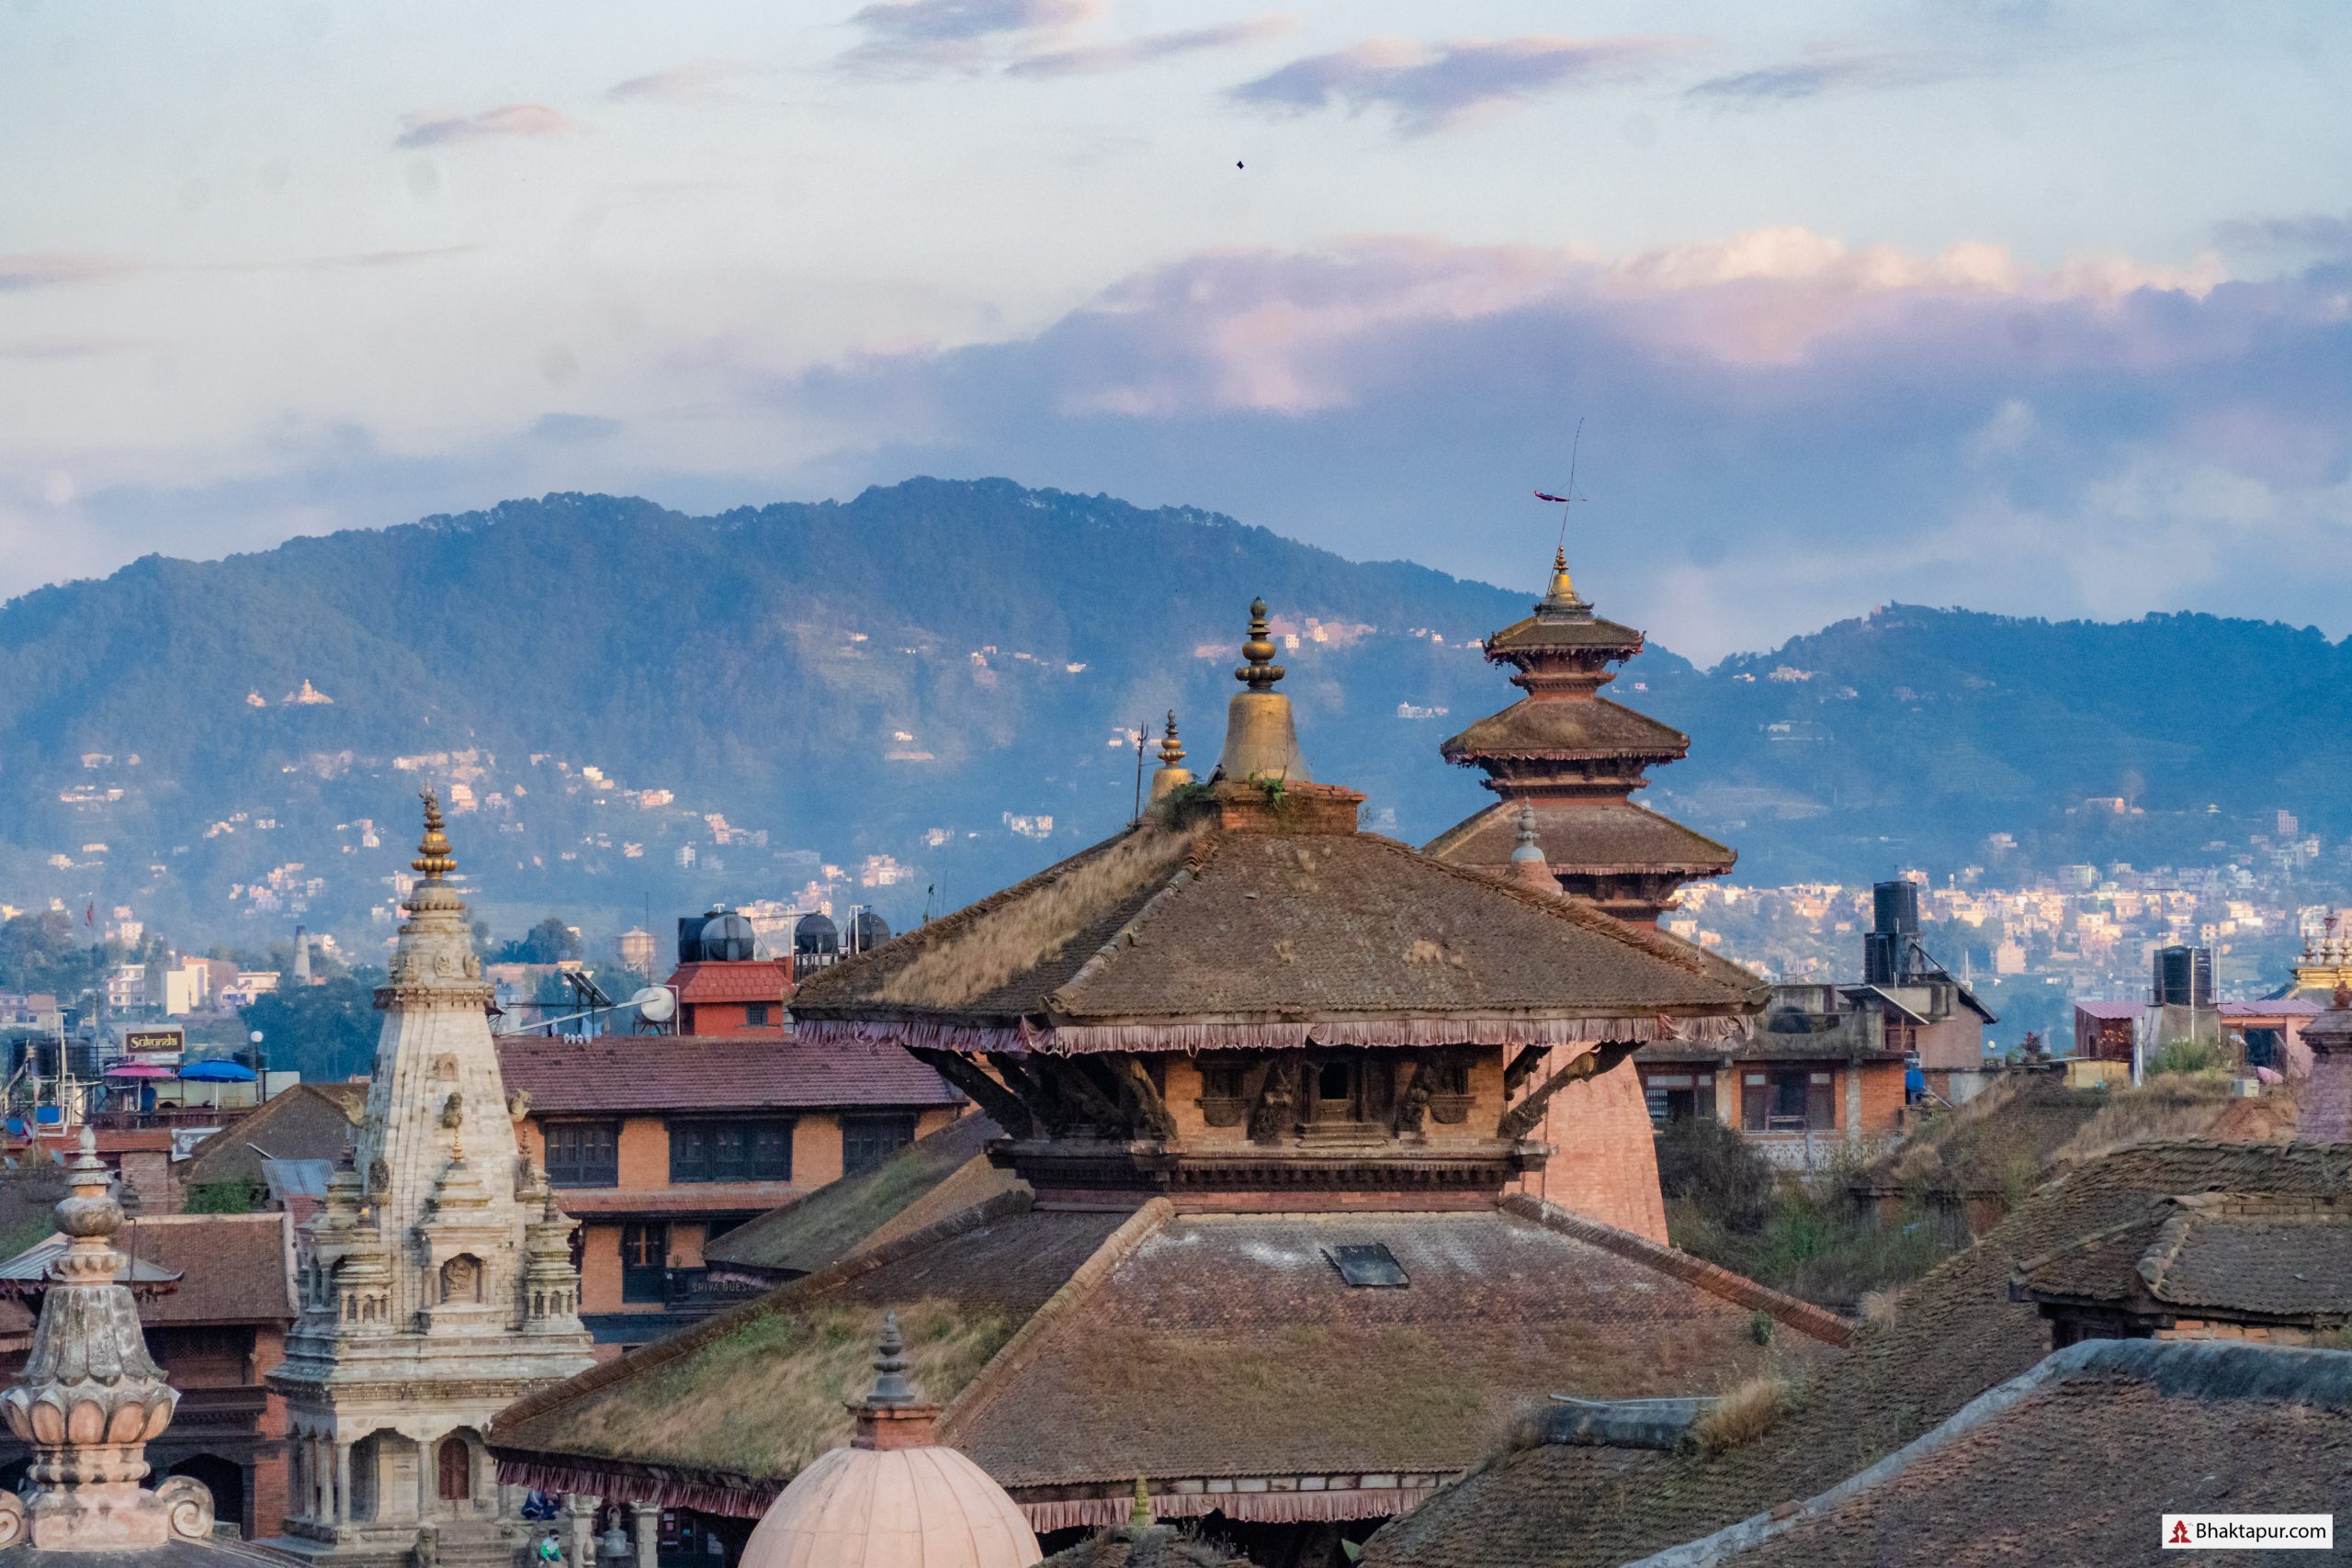 Why do people visit Bhaktapur?